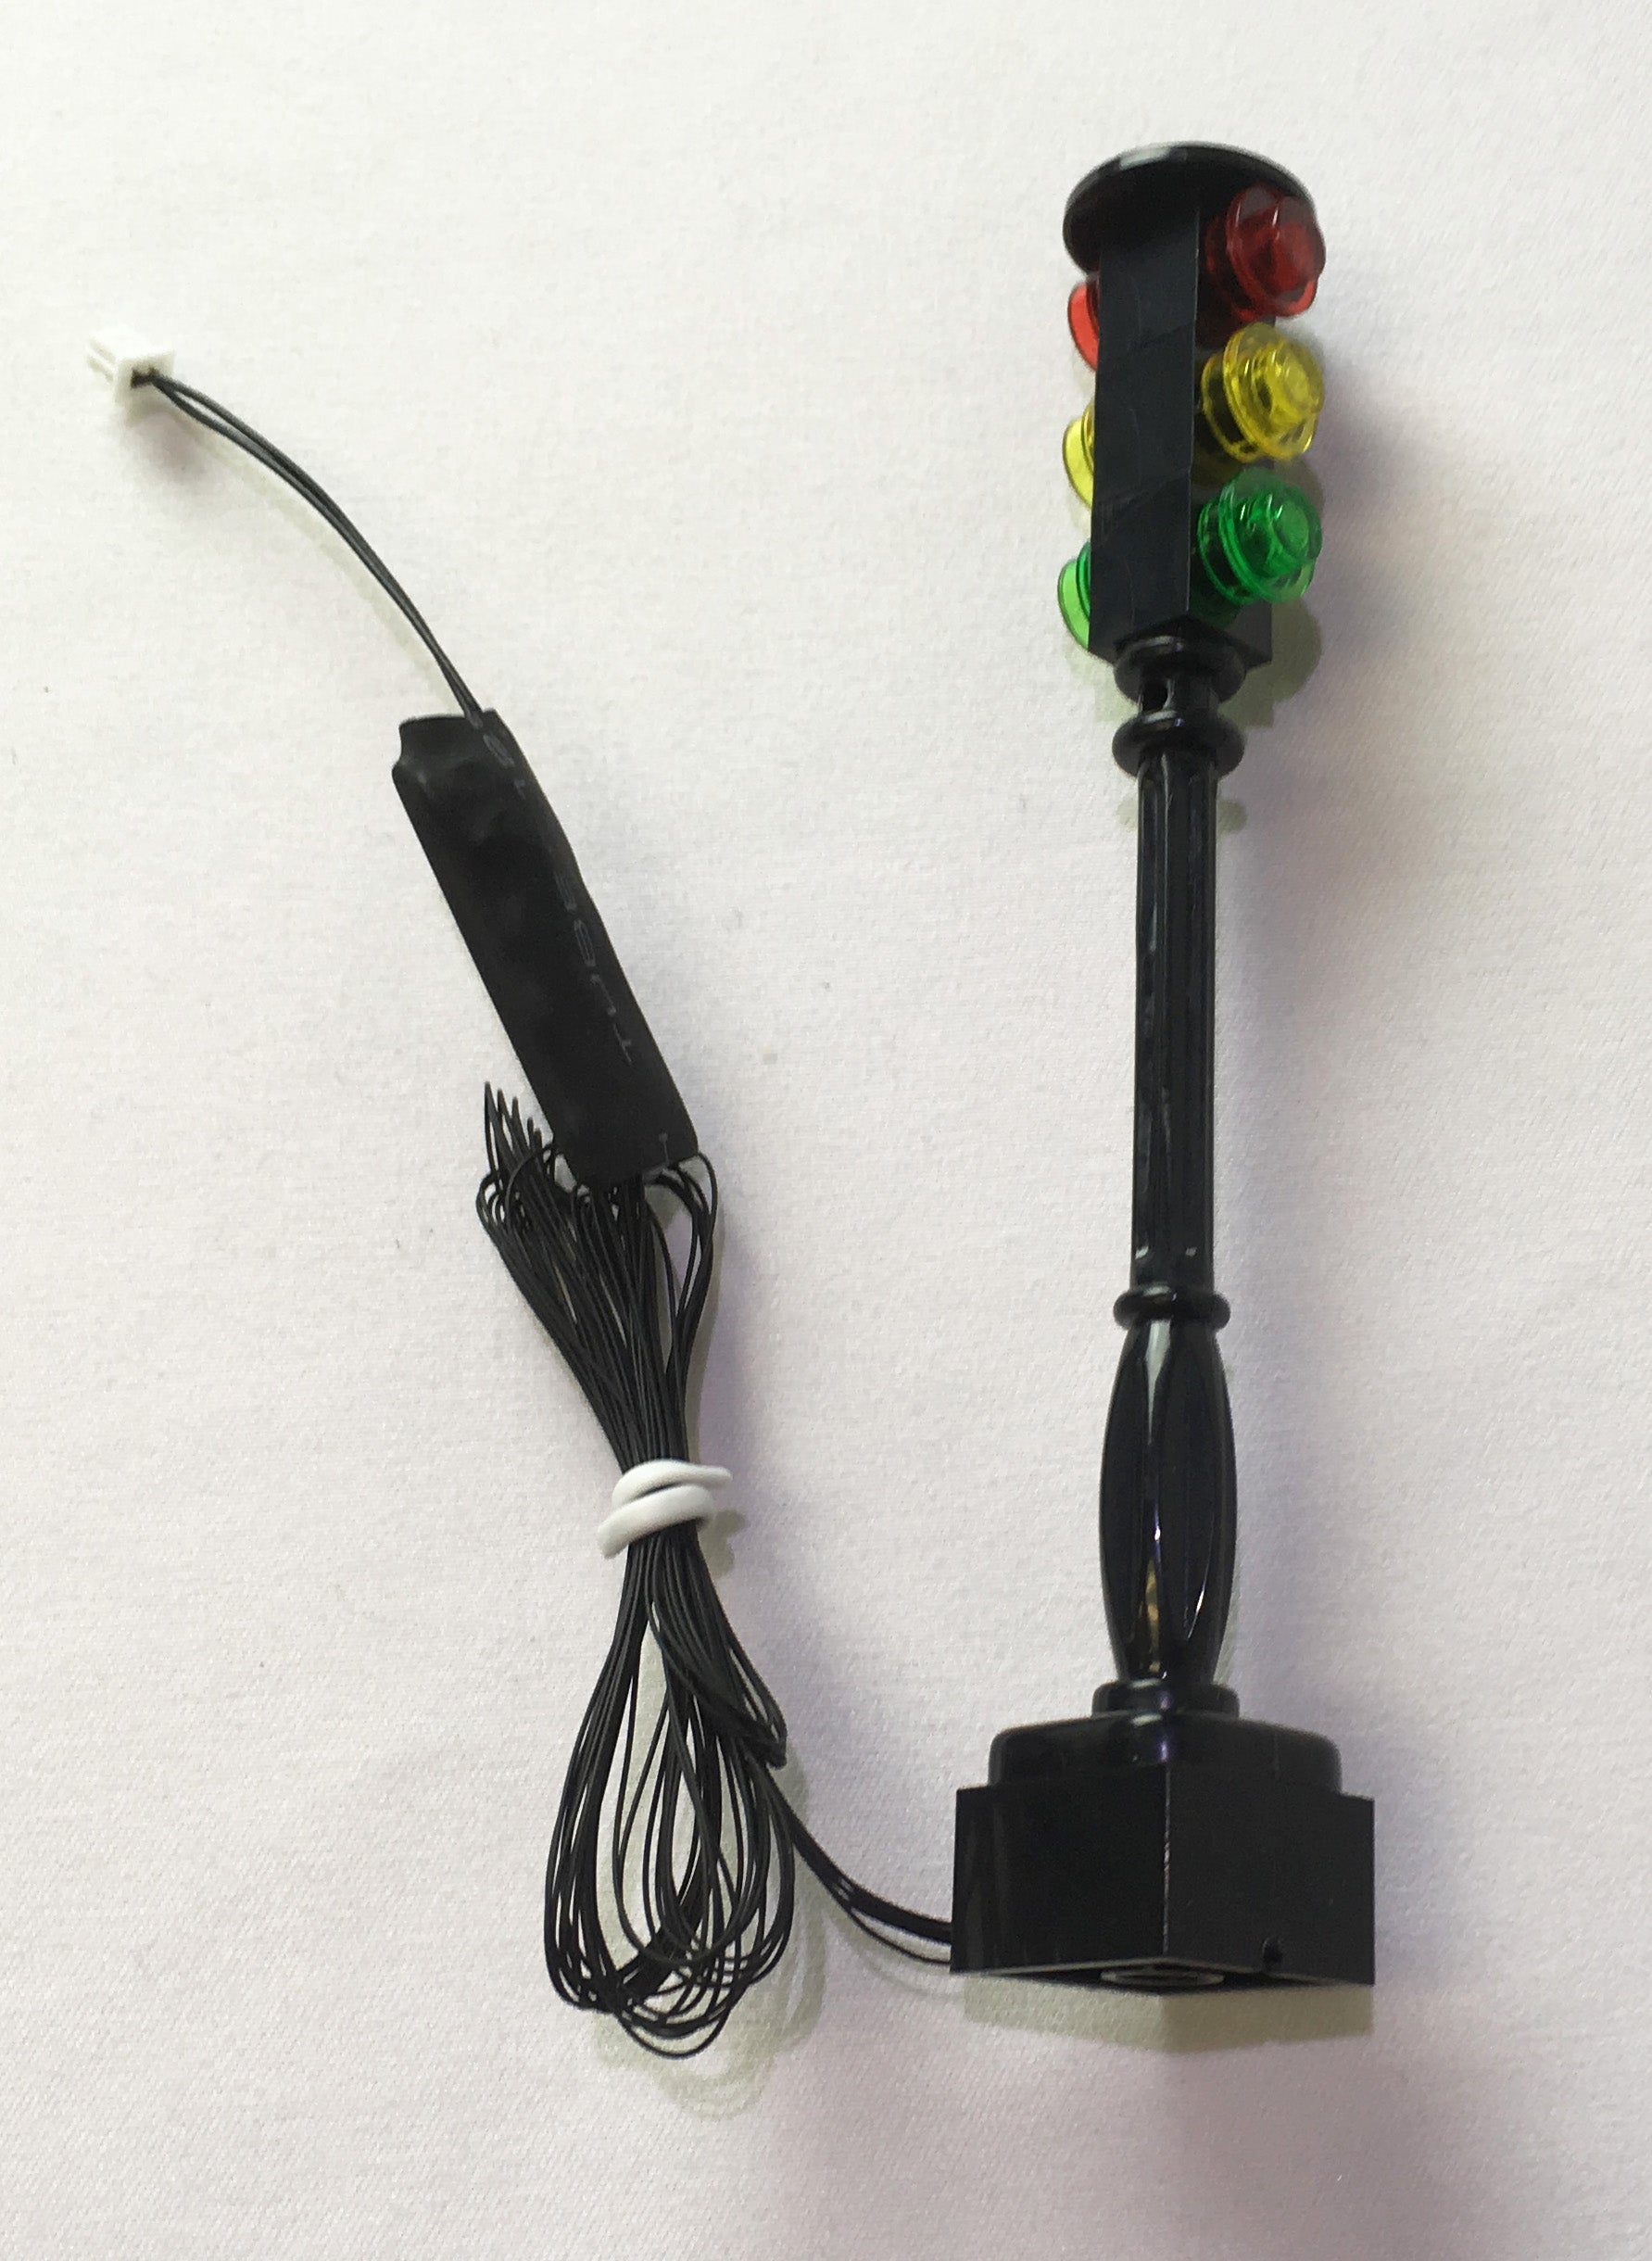 LED Street Lamps and Traffic Lights for LEGO - LIGHT LINX- works